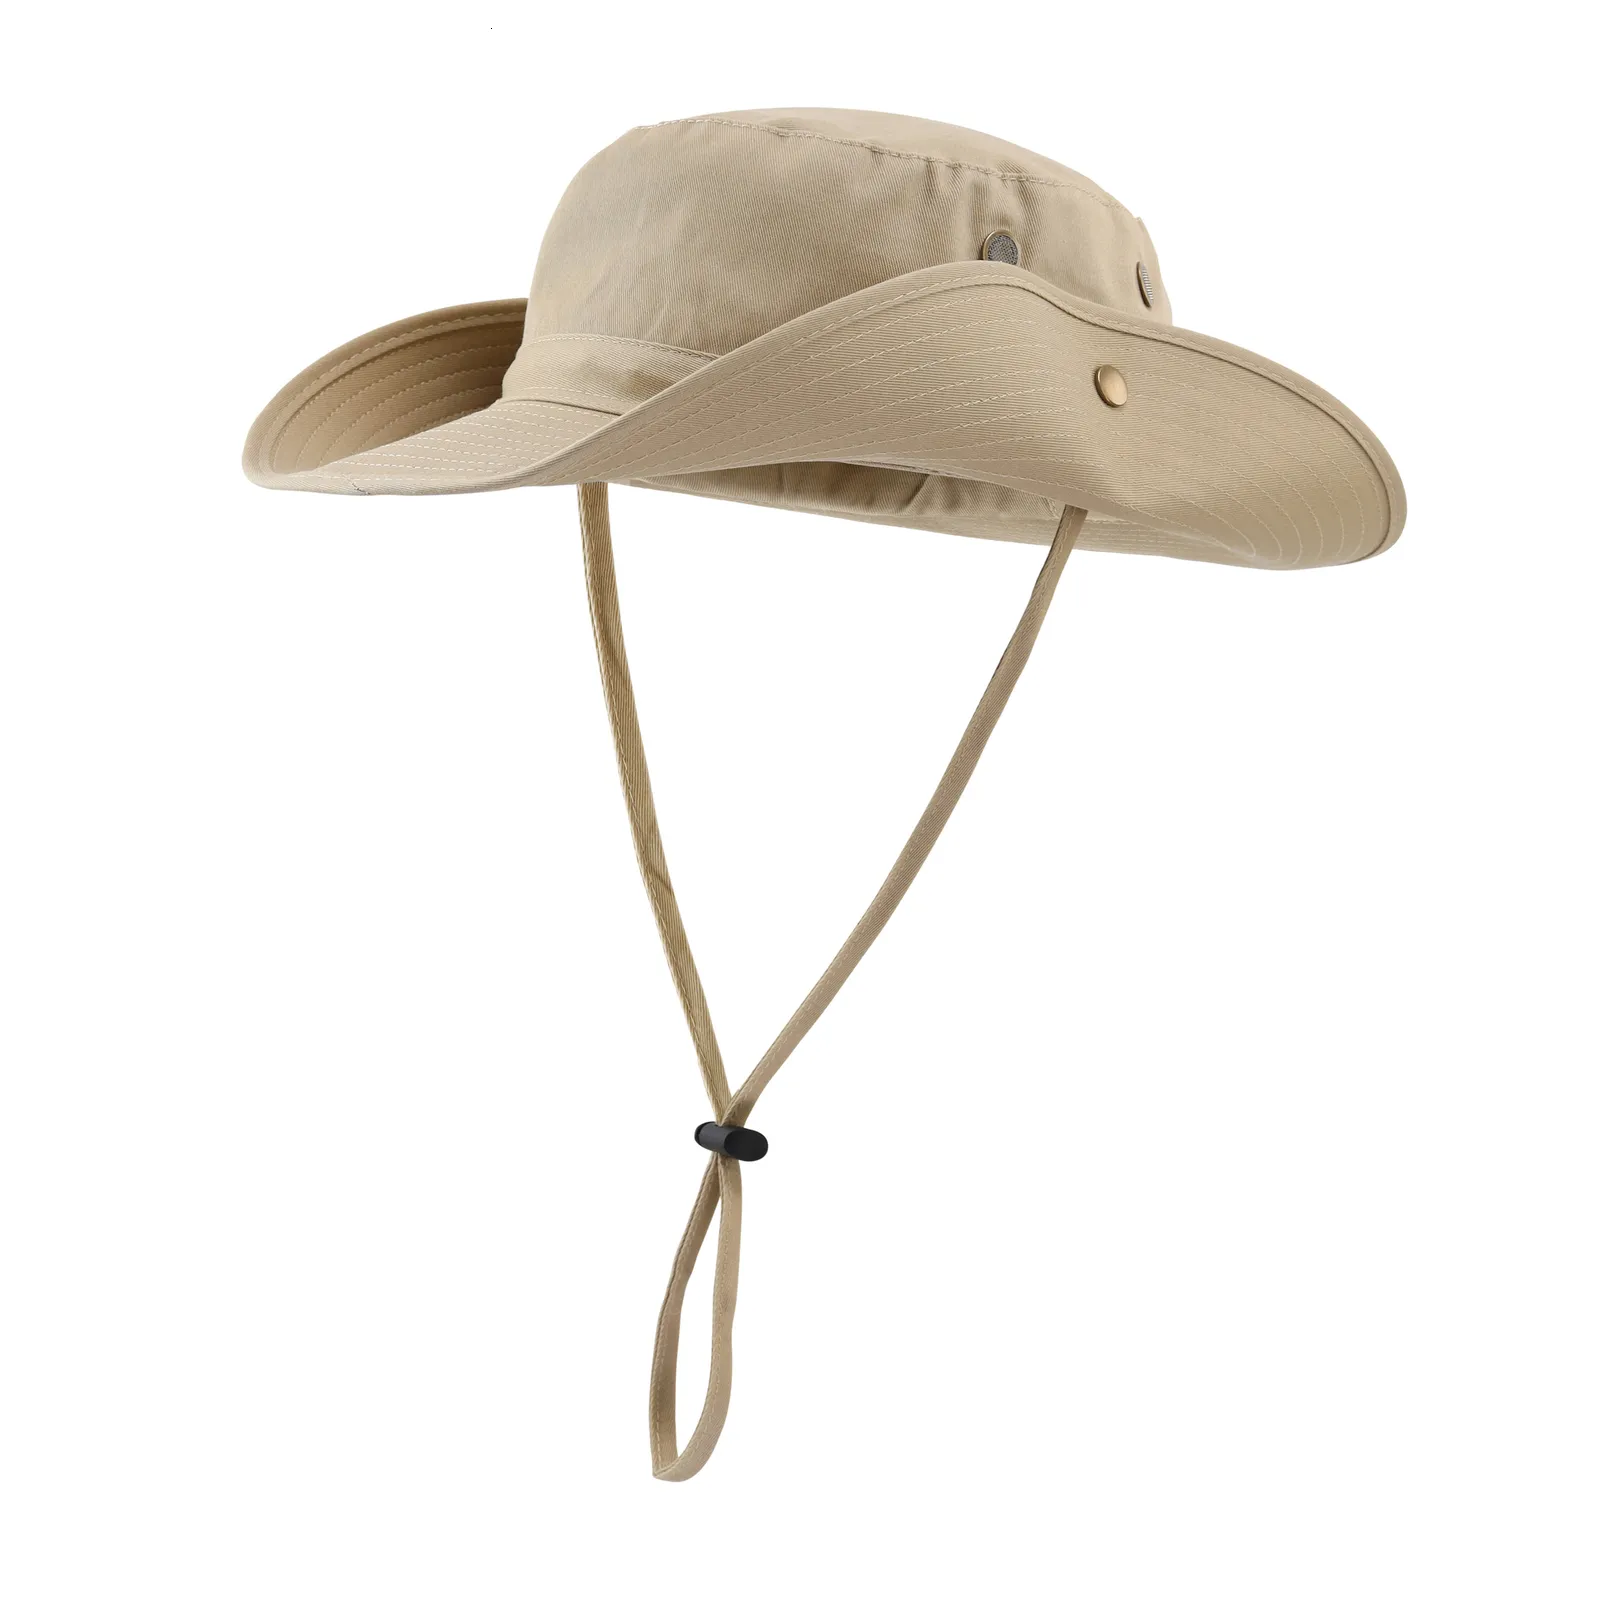 Adjustable Wide Brim Mens Boonie Chin Strap Bucket Hat With UV Protection  And Bucket Connectyle Breathable Cotton Safari Cap From Fan03, $15.42